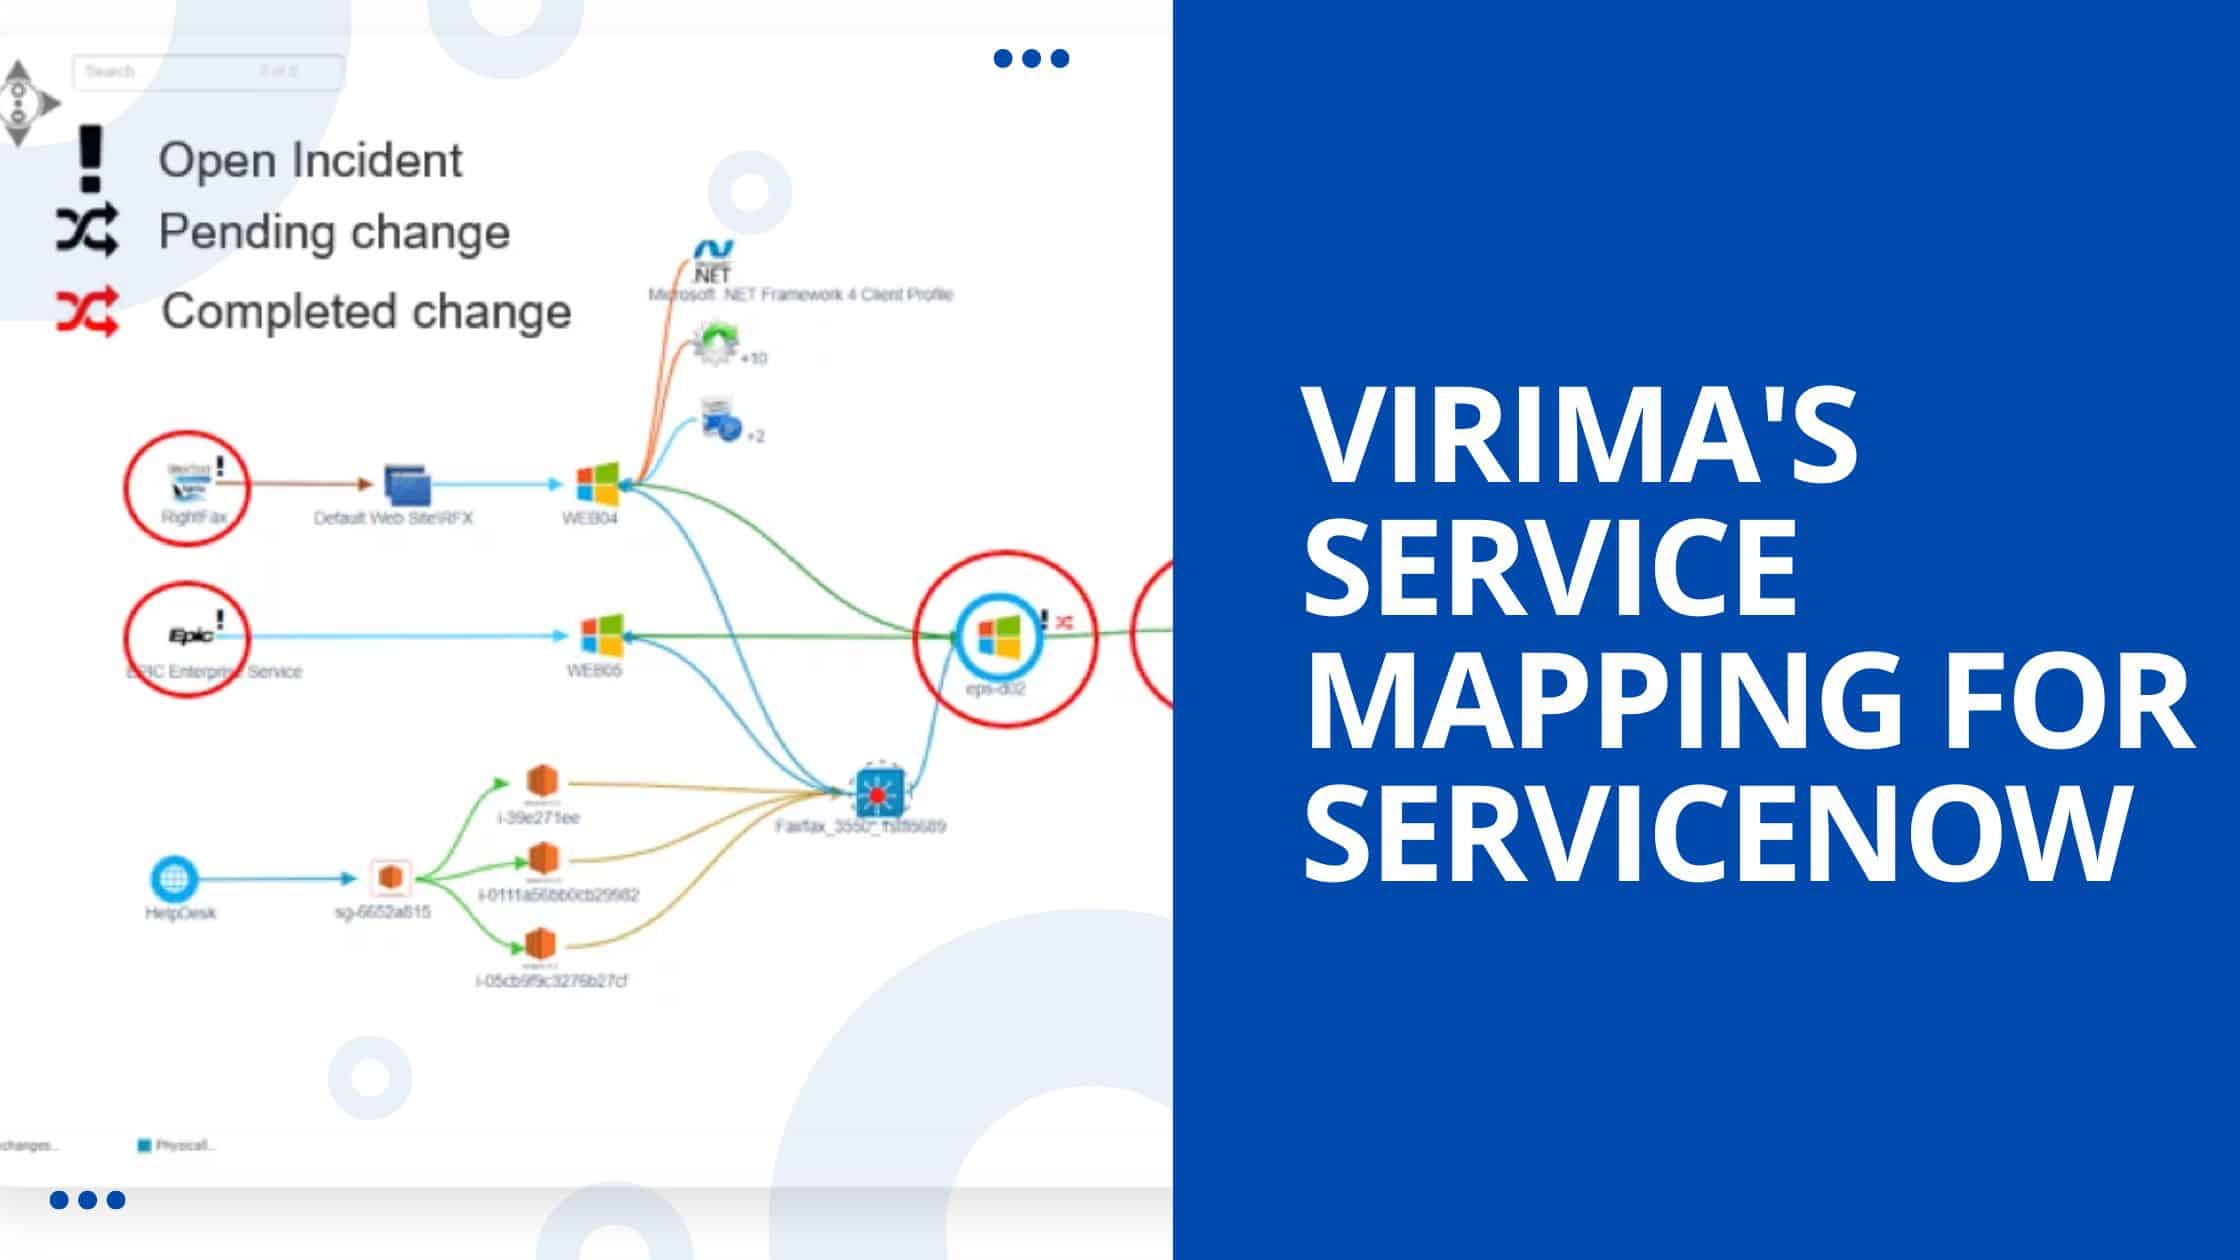 Virima's service mapping for servicenow